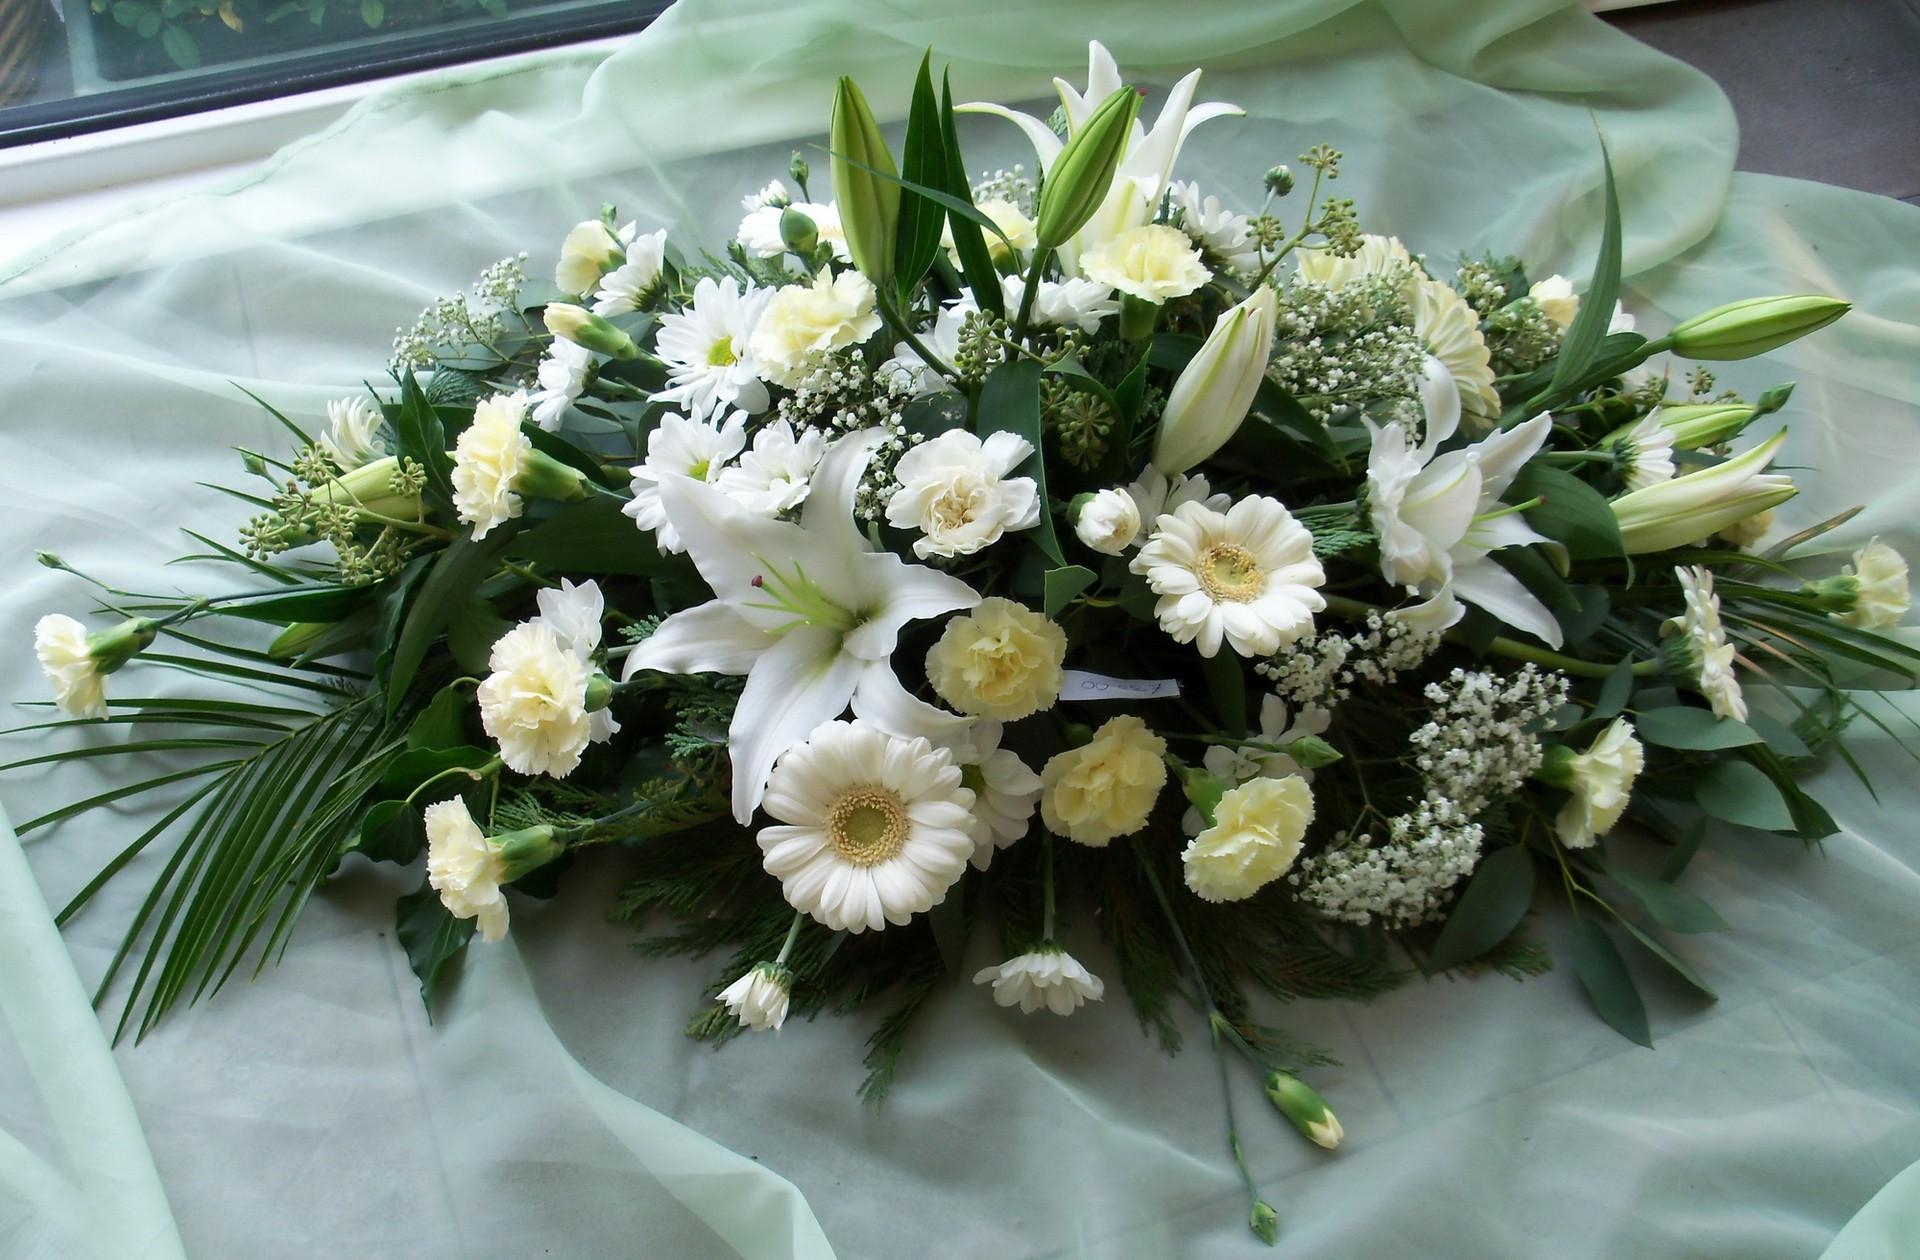 handsomely, gypsophilus, flowers, lilies, carnations, gerberas, gipsophile, composition, it's beautiful